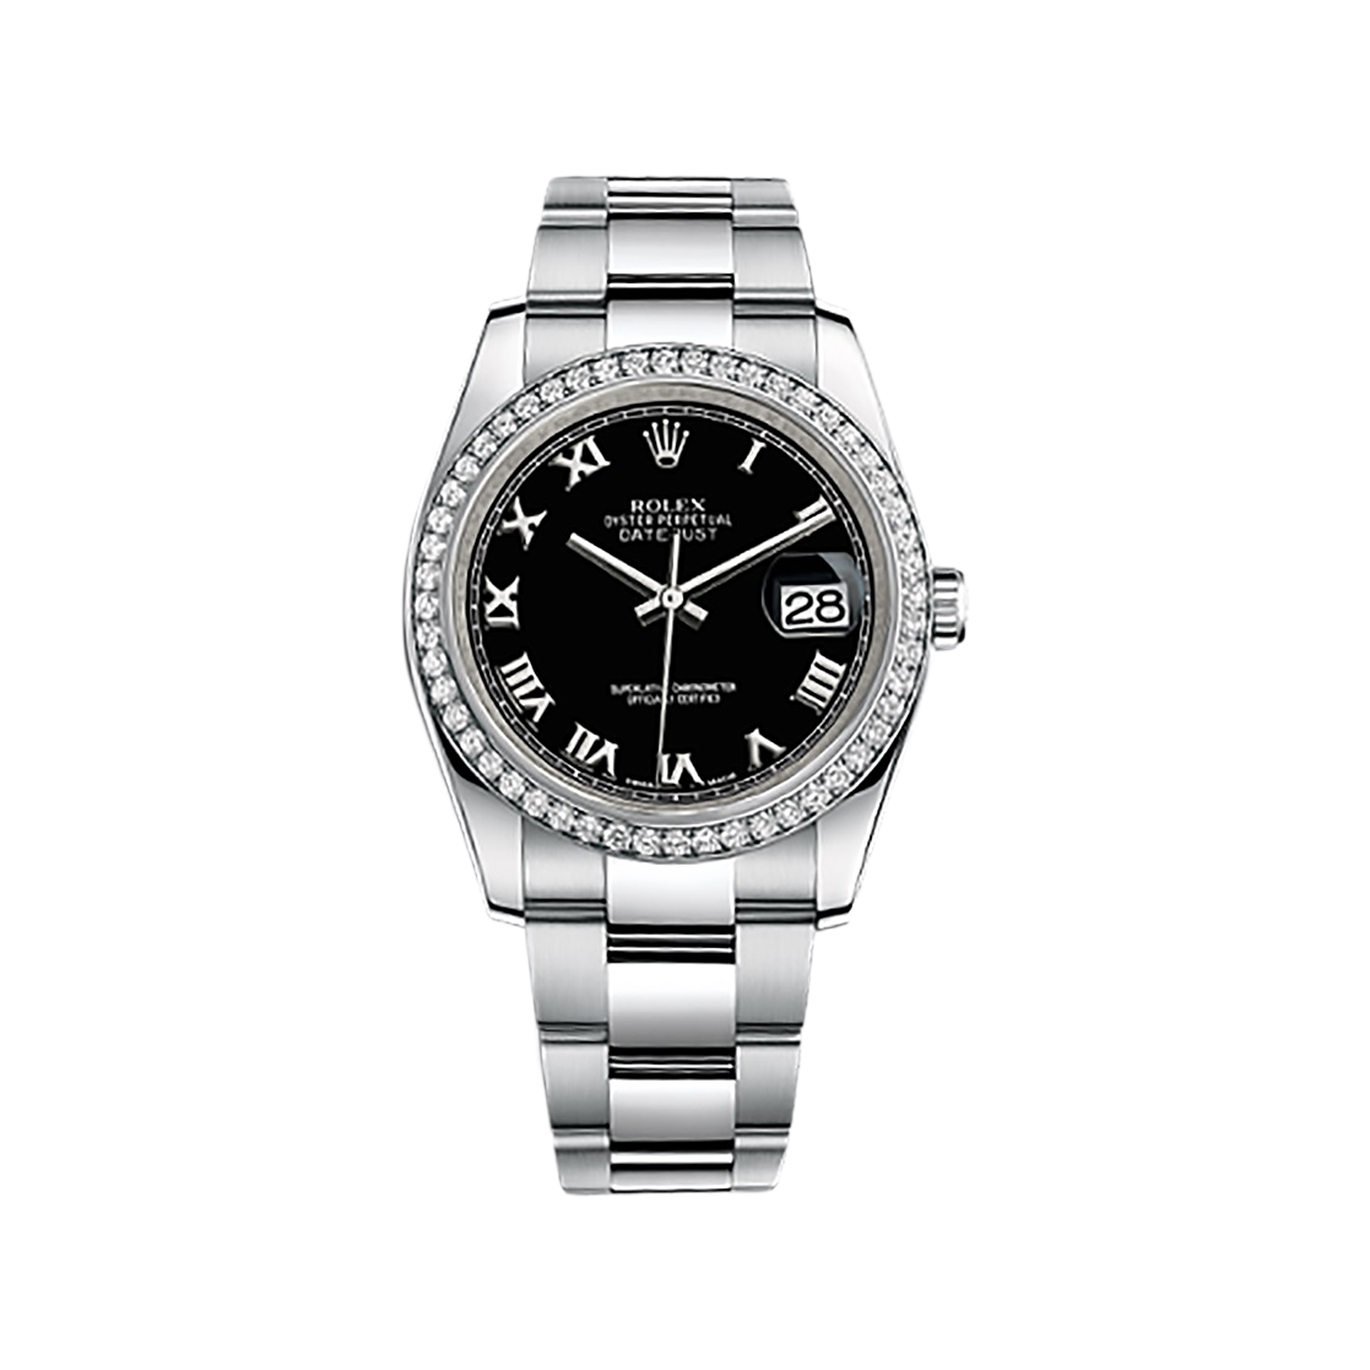 Datejust 36 116244 White Gold & Stainless Steel Watch (Black)